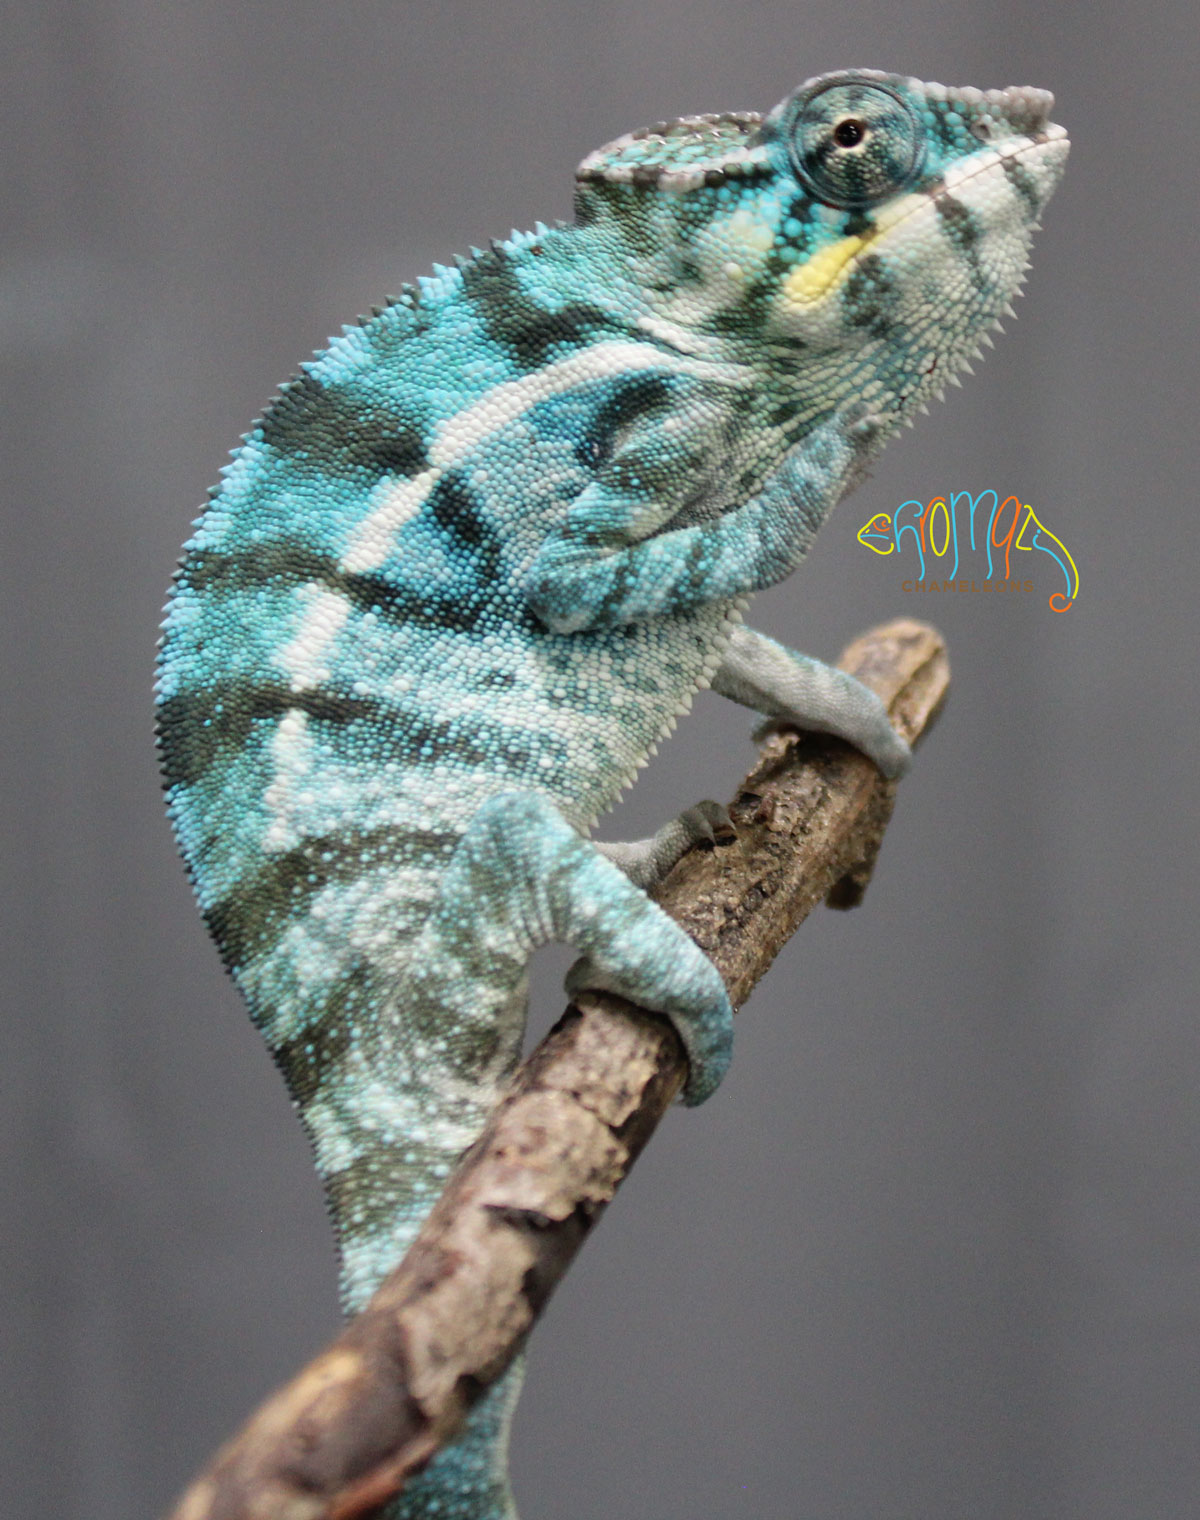 Male Nosy Be panther chameleon for sale